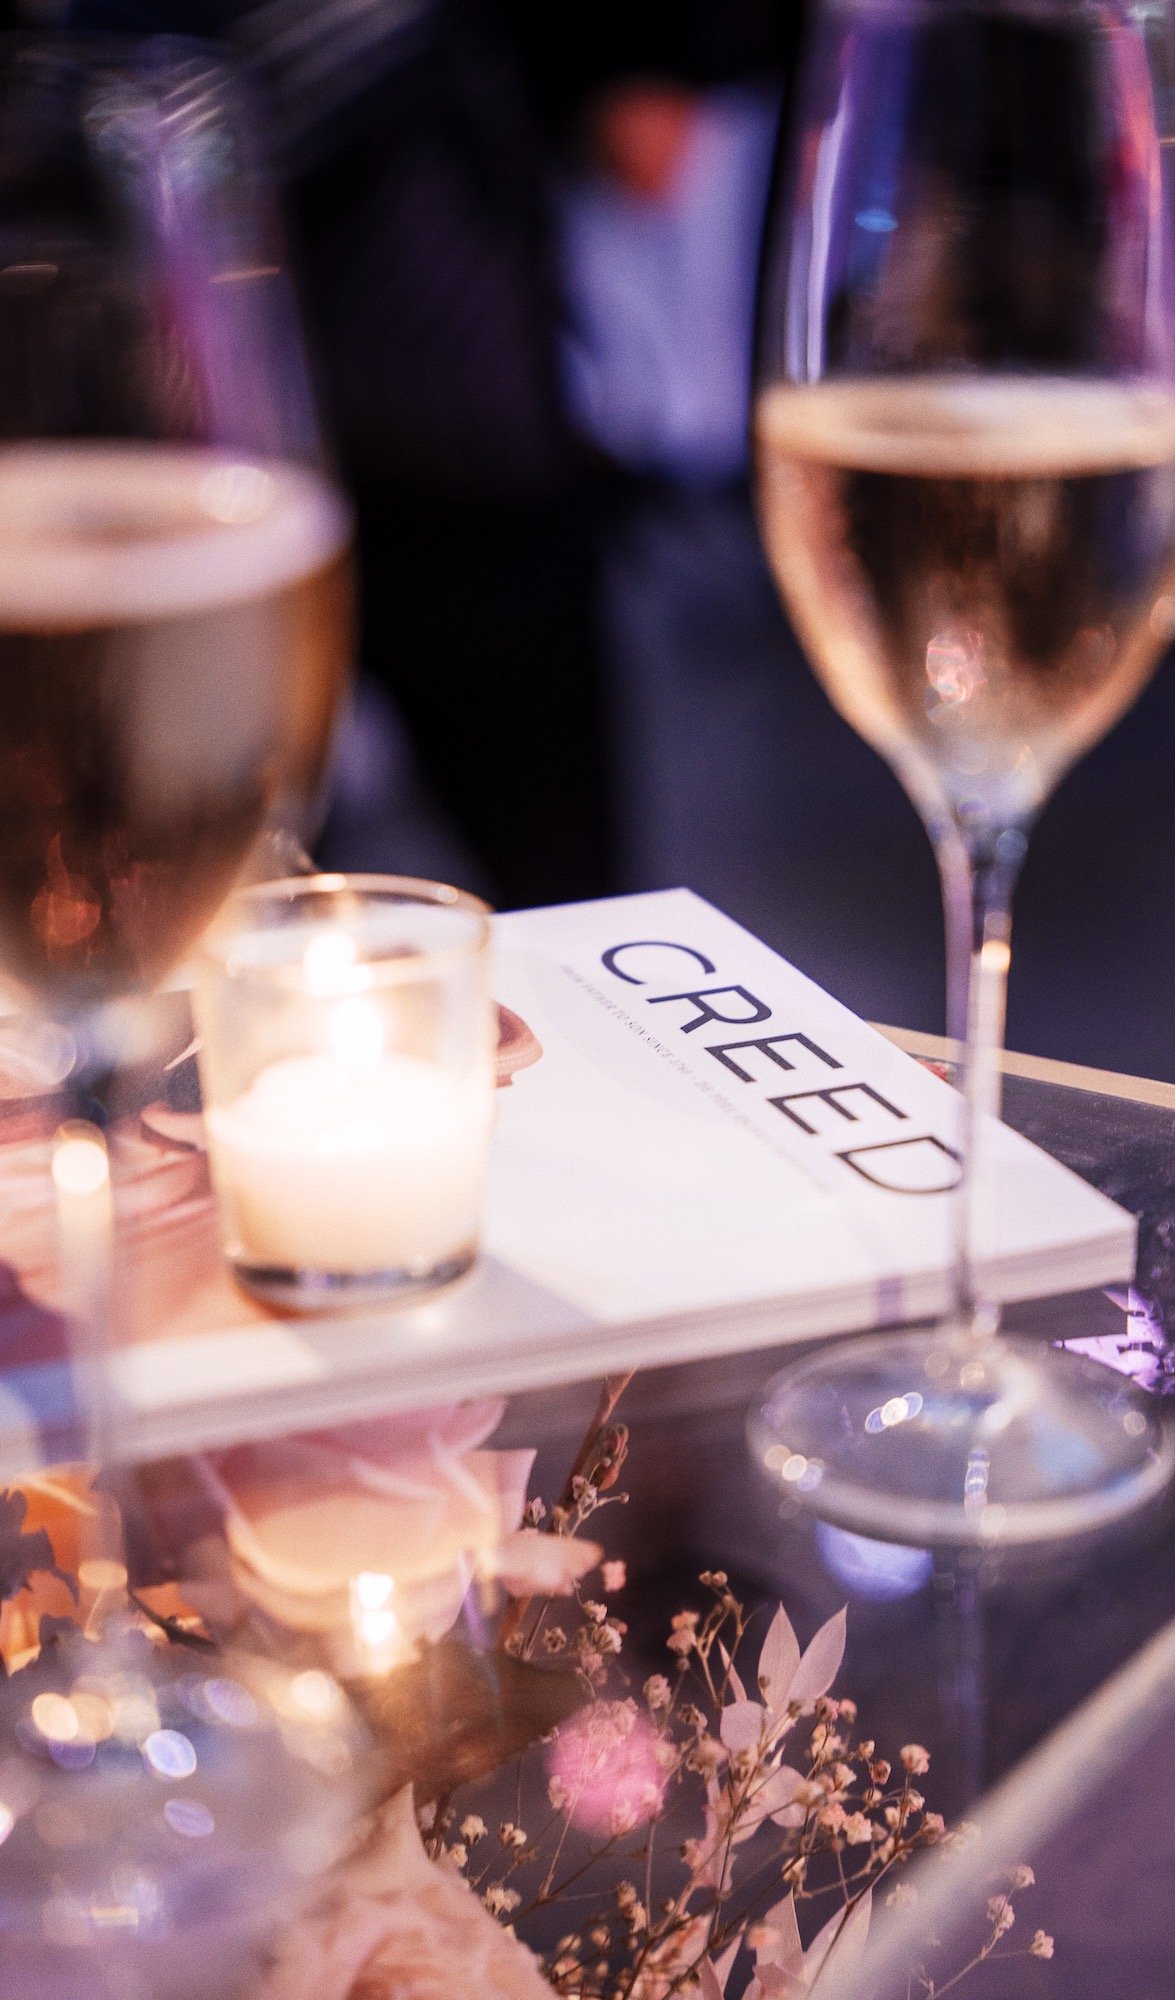 Miami Catering Company - Corporate event - Thierry Isambert for Creed 17.jpg